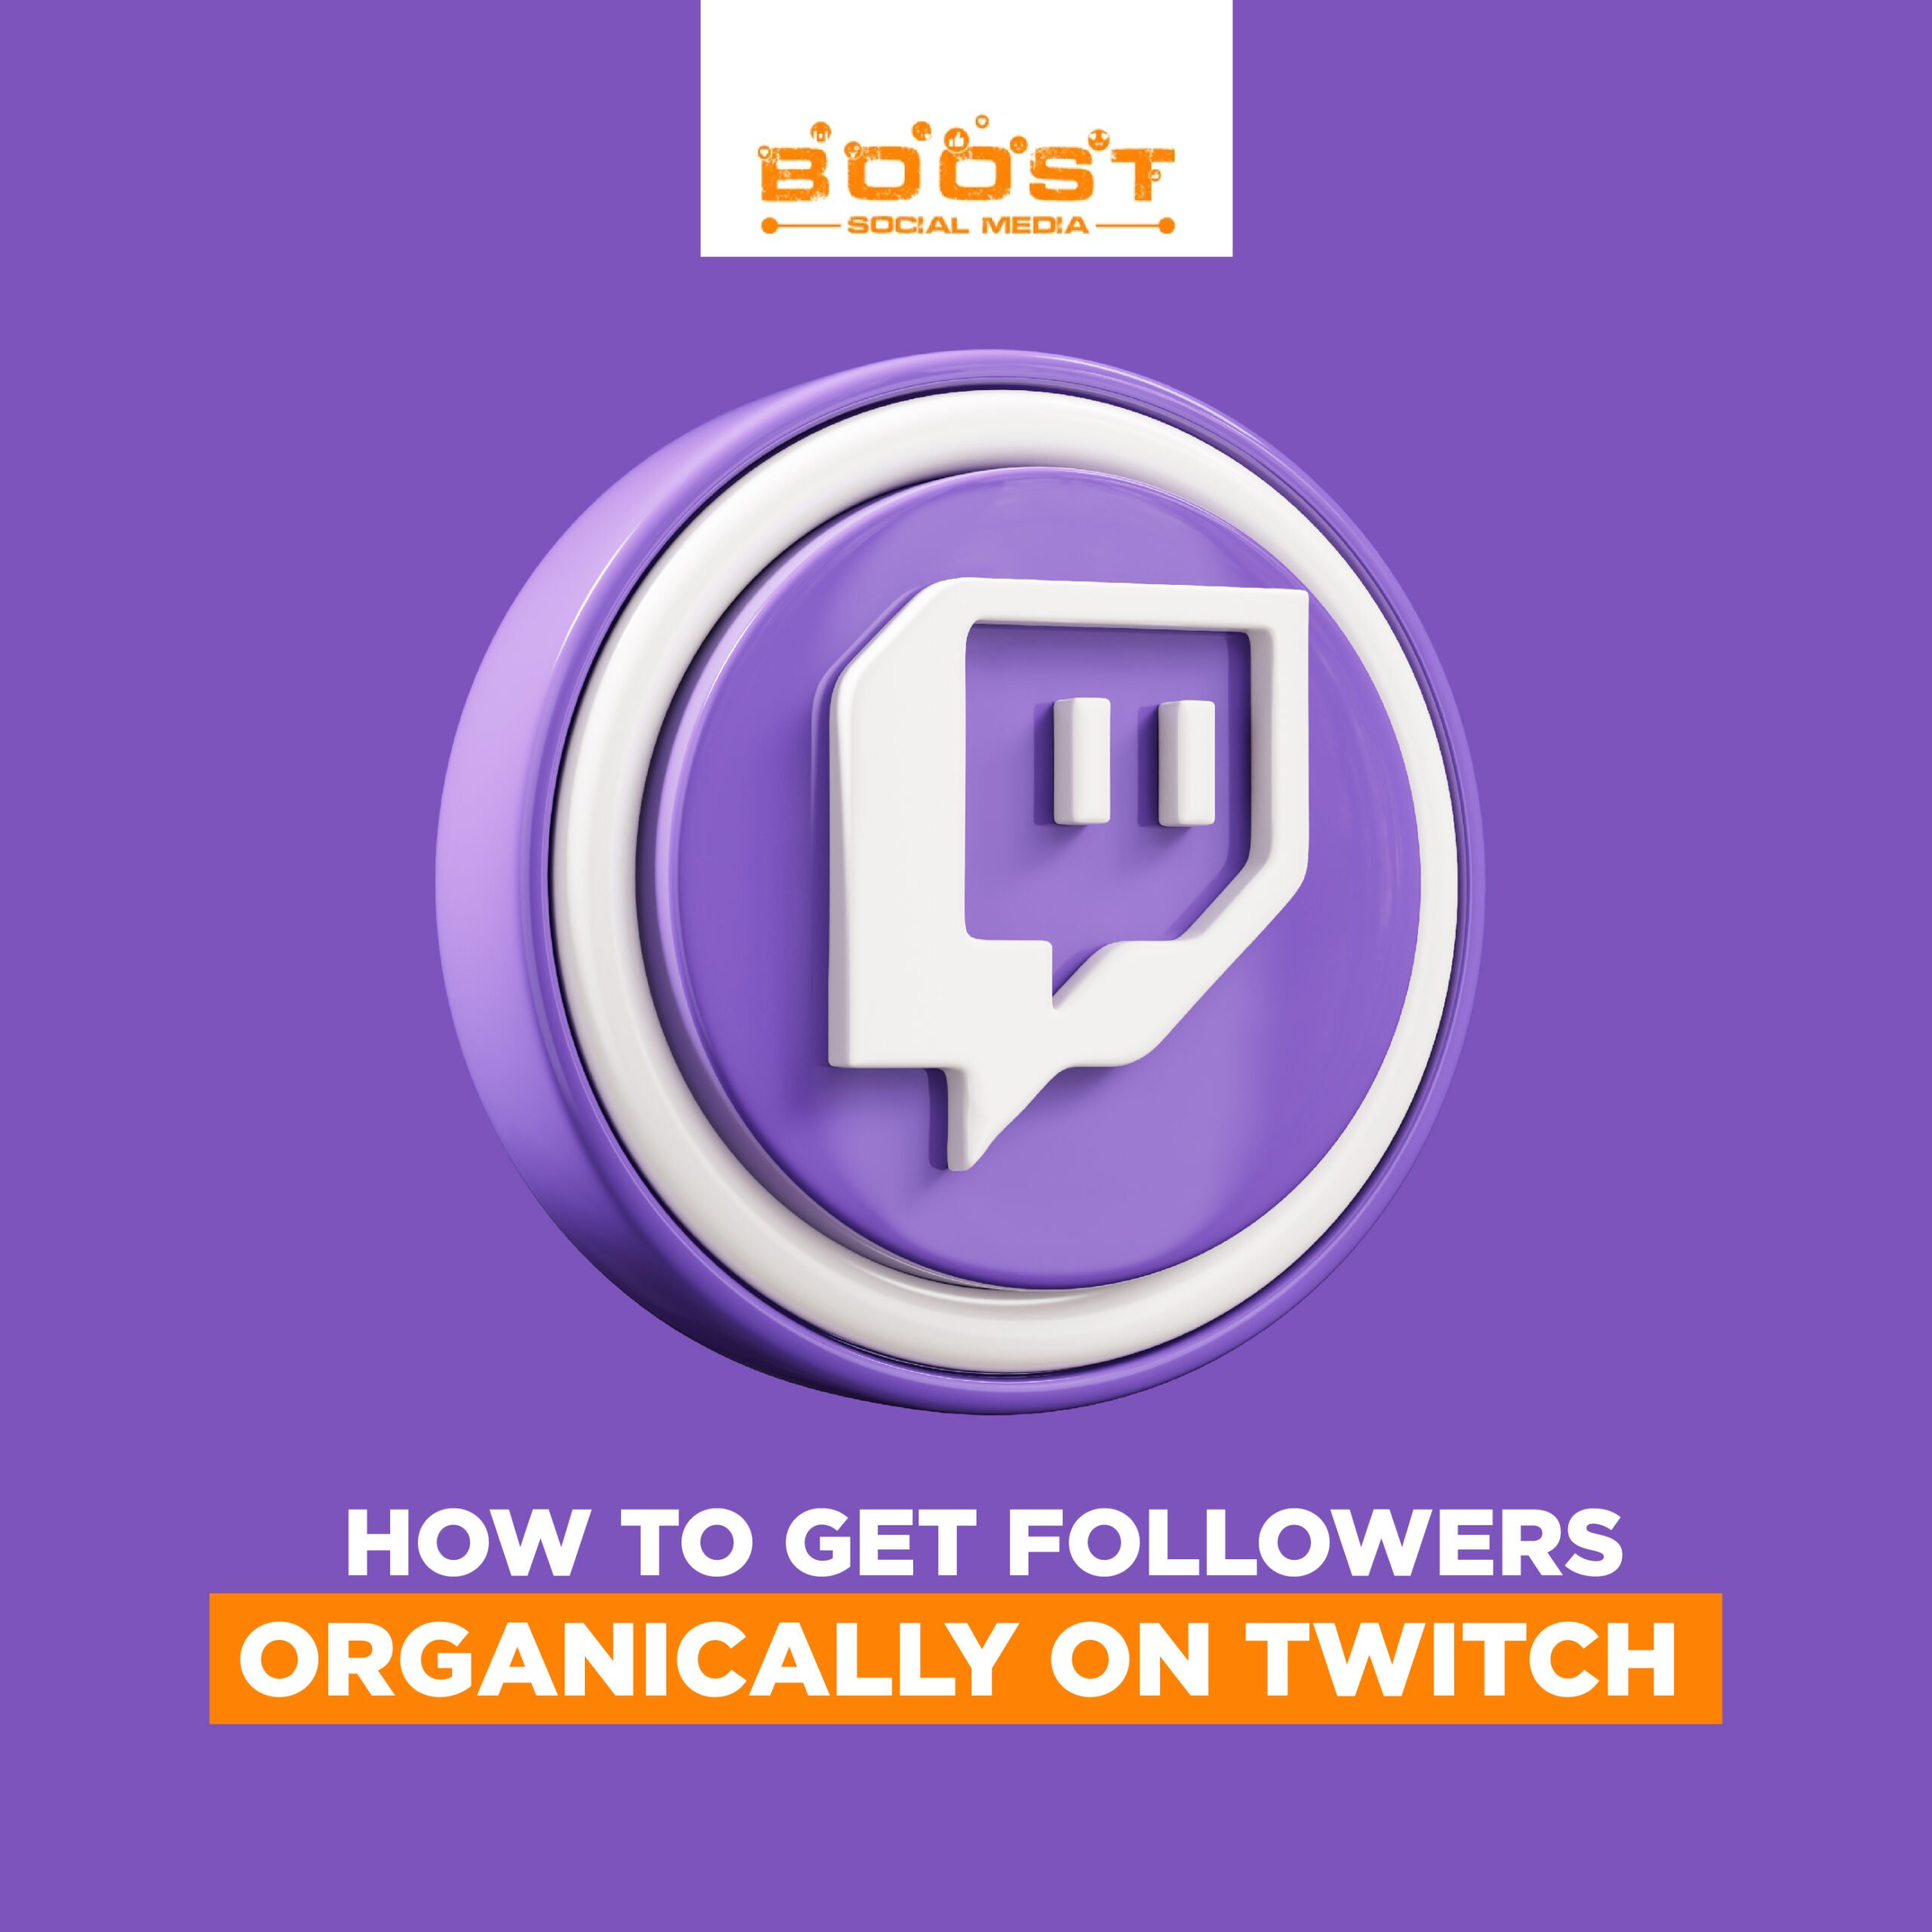 How To Get Followers Organically On Twitch 